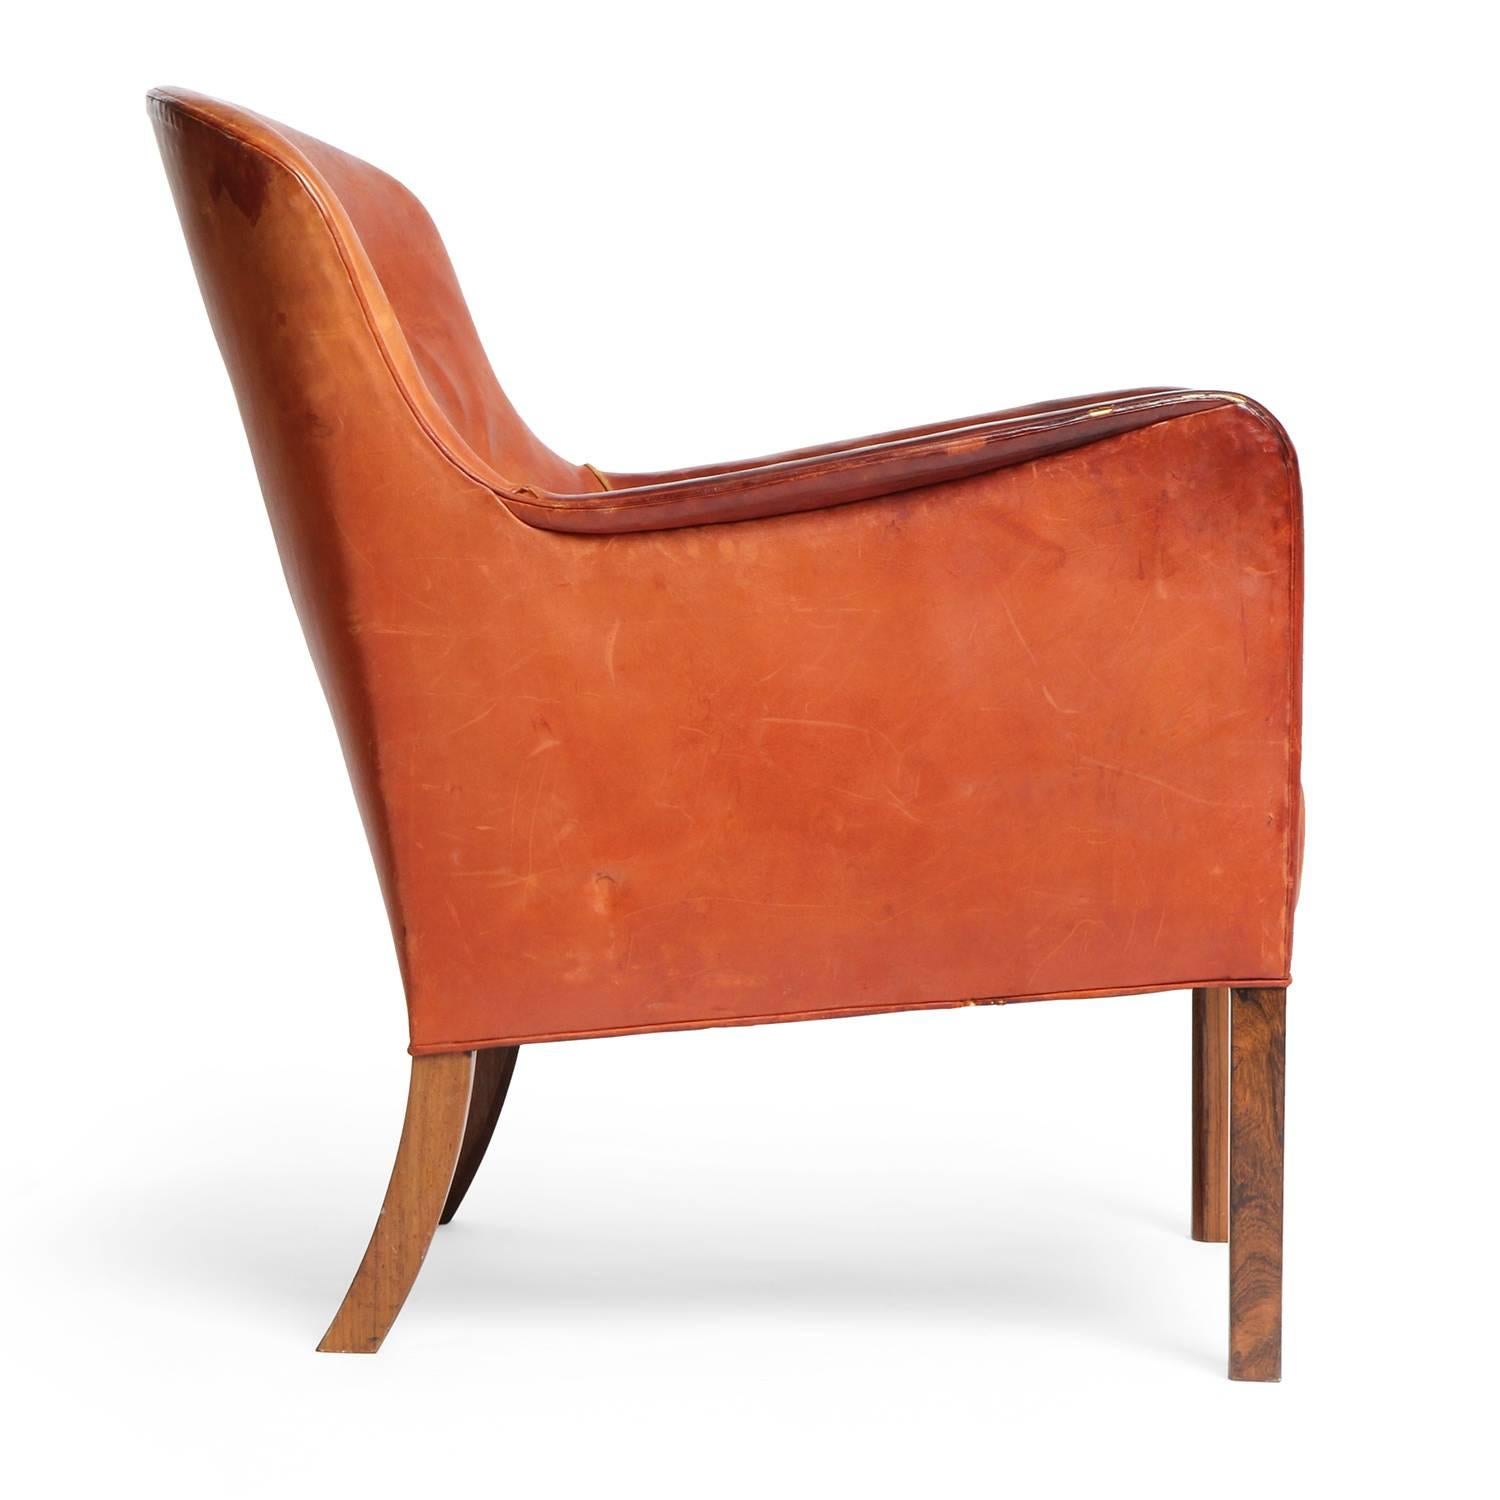 A button tufted lounge chair in the original leather upholstery with rosewood legs.